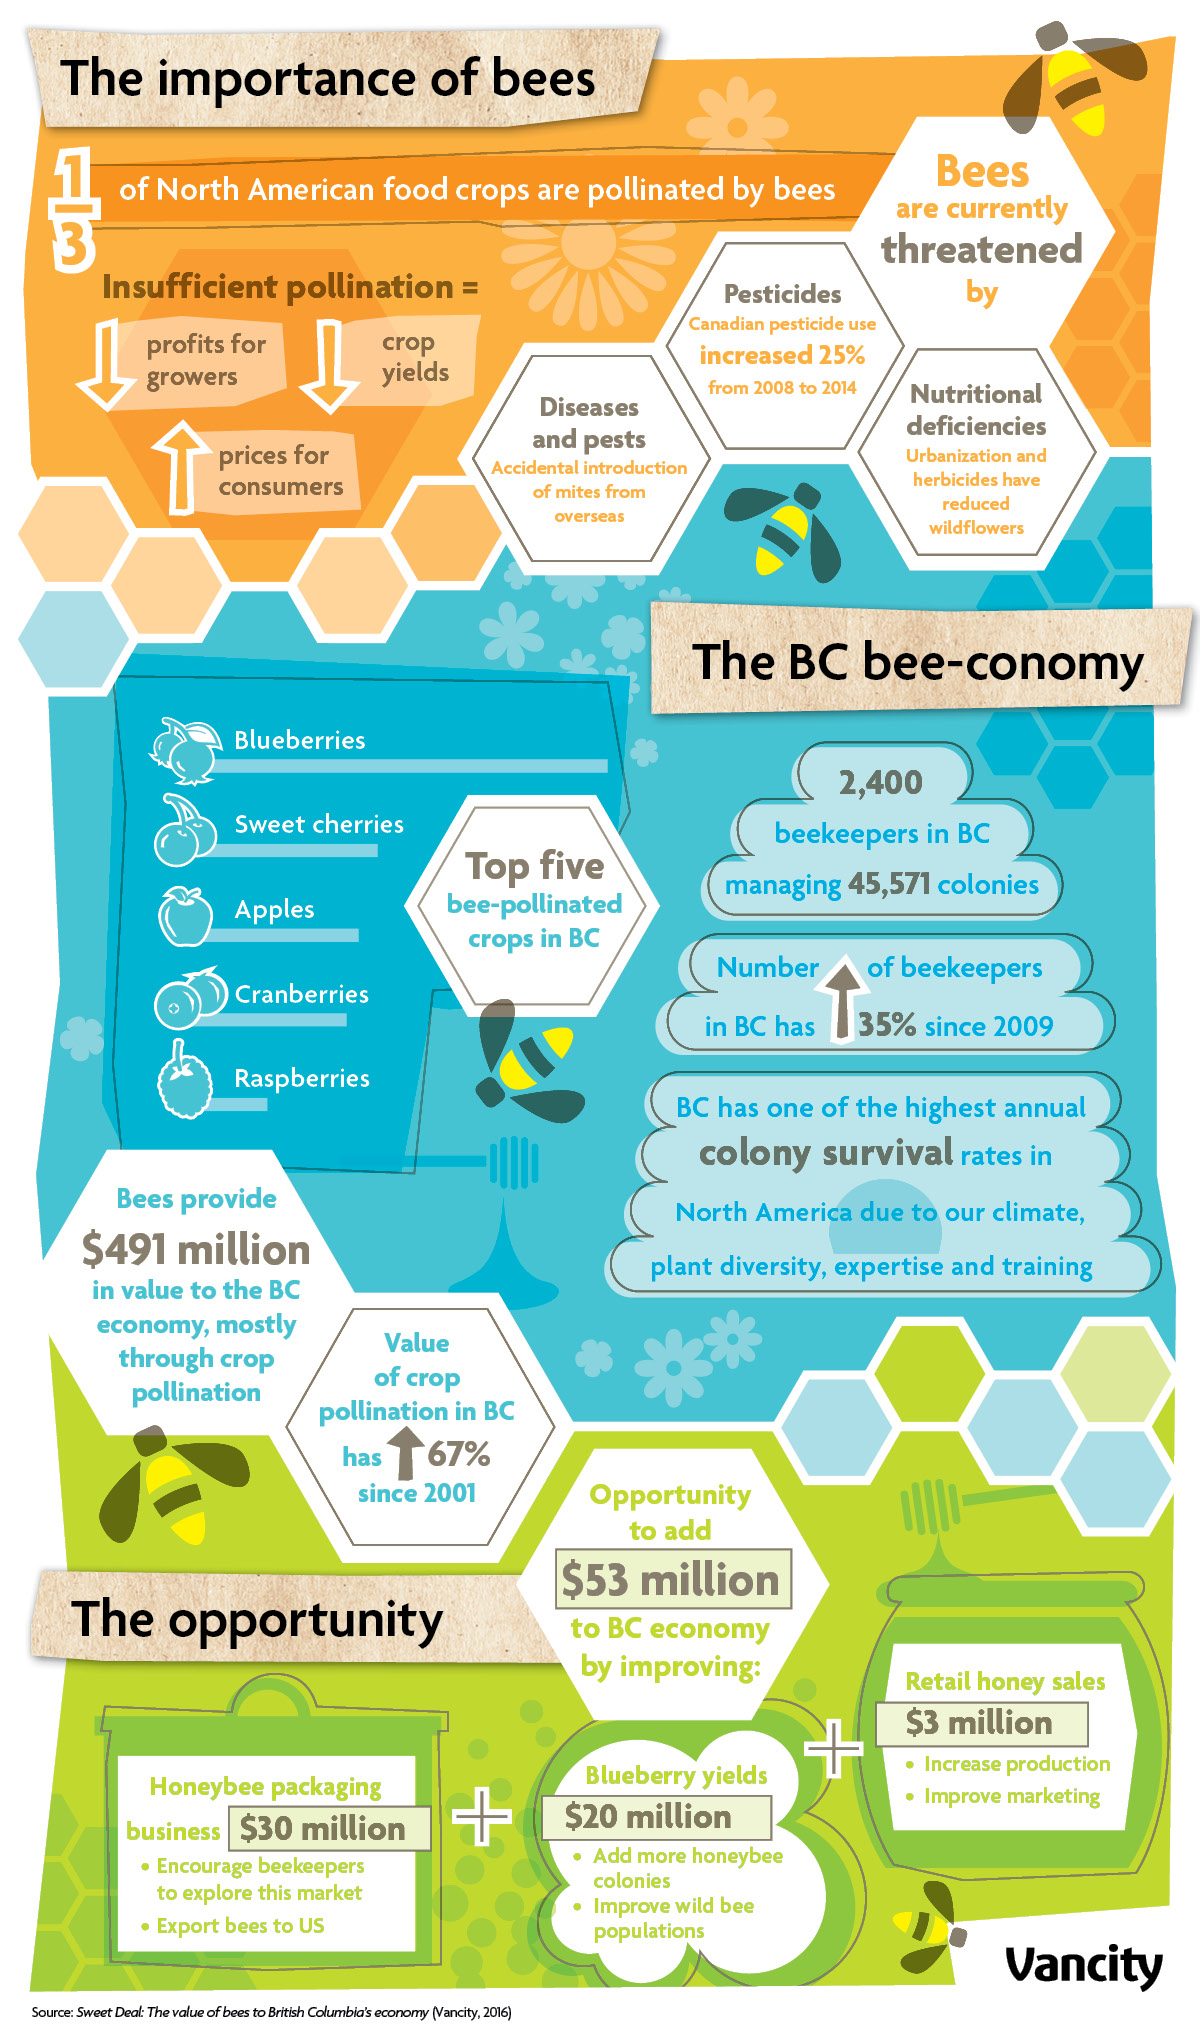 Vancity_Importance-of-Bees_Infographic_FNL